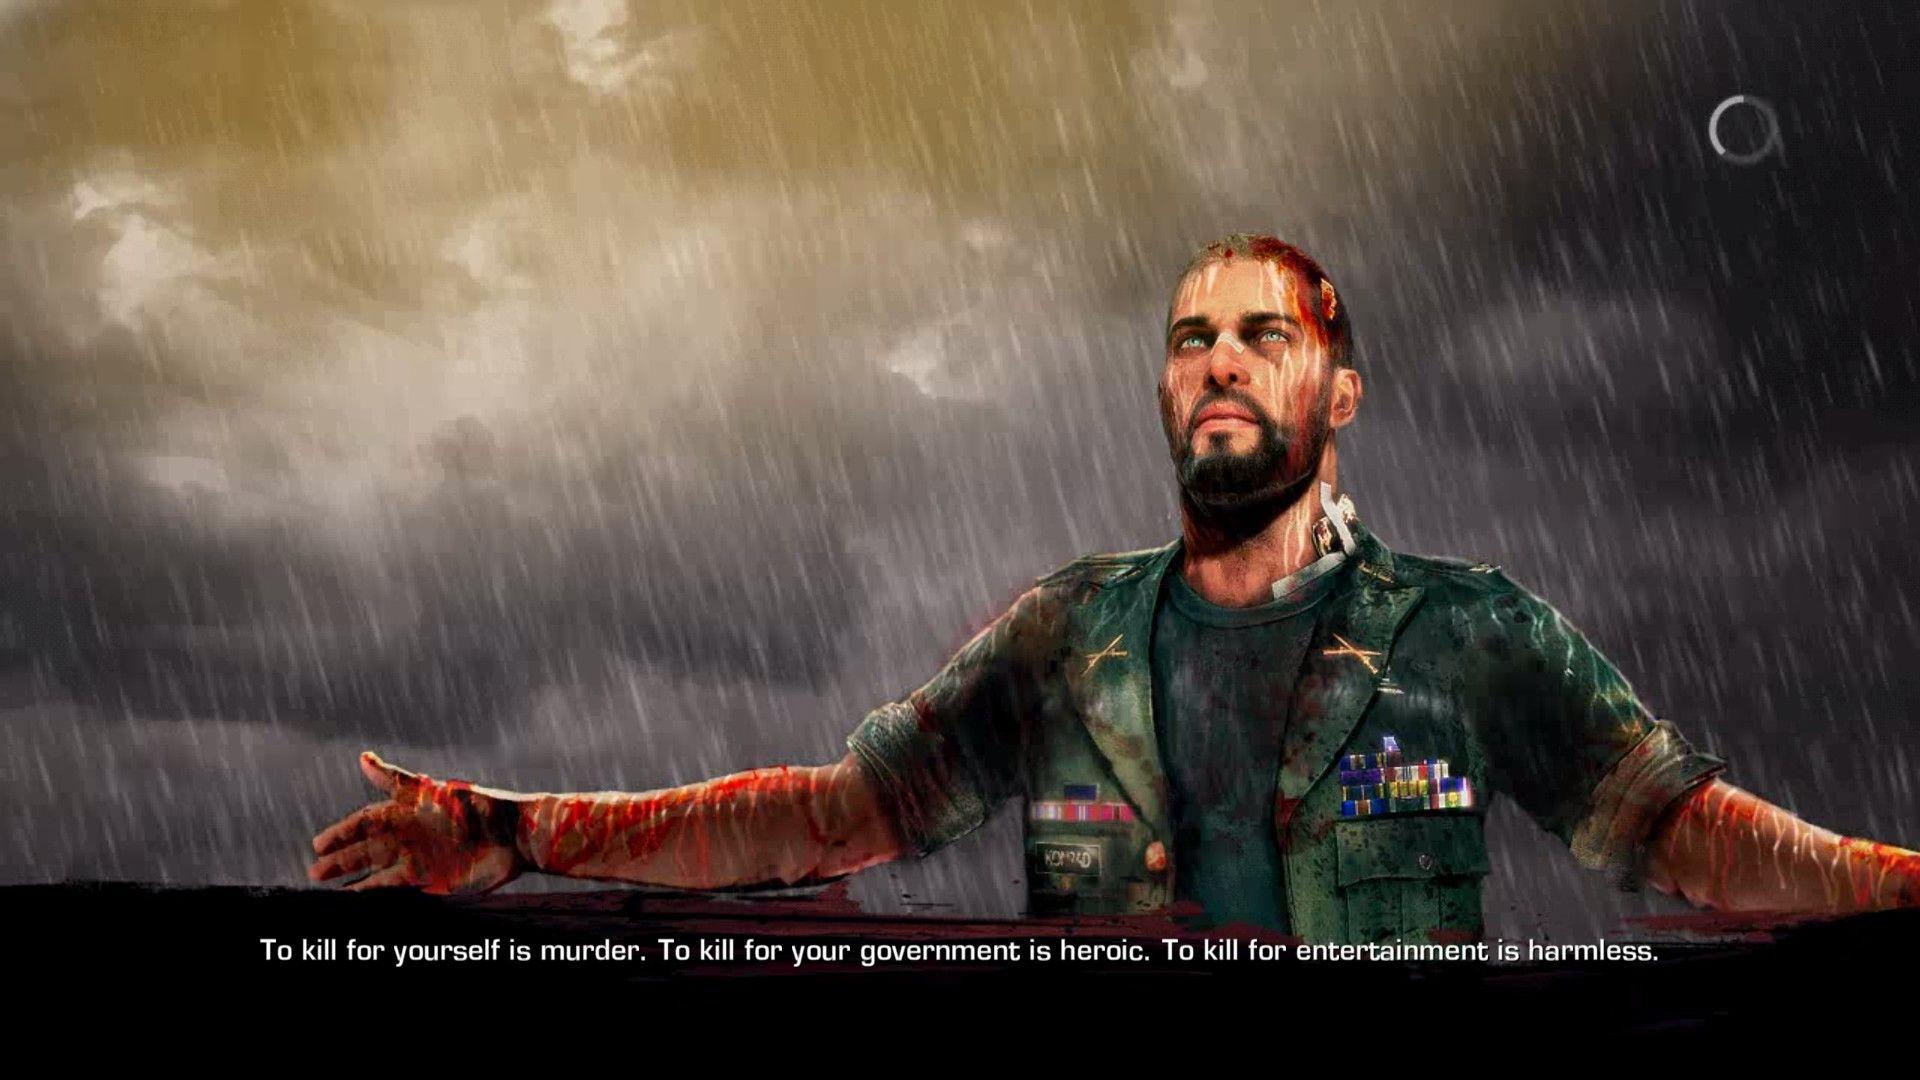 The loading screens of Spec Ops: The Line are strategically designed